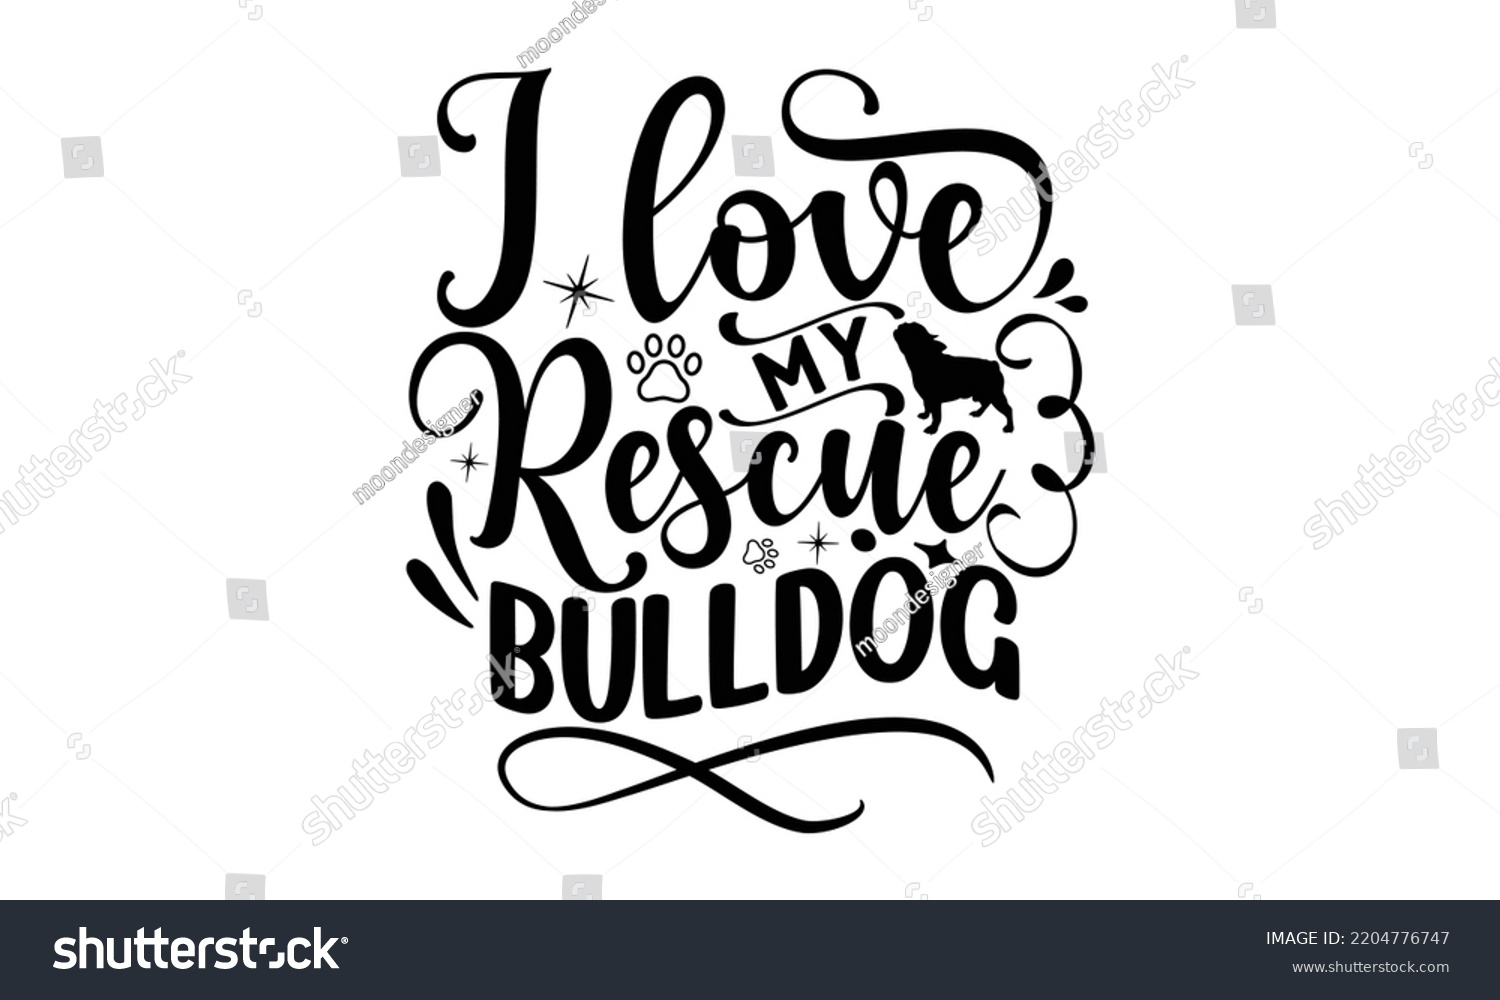 SVG of I love my rescue bulldog - Bullodog T-shirt and SVG Design,  Dog lover t shirt design gift for women, typography design, can you download this Design, svg Files for Cutting and Silhouette EPS, 10 svg